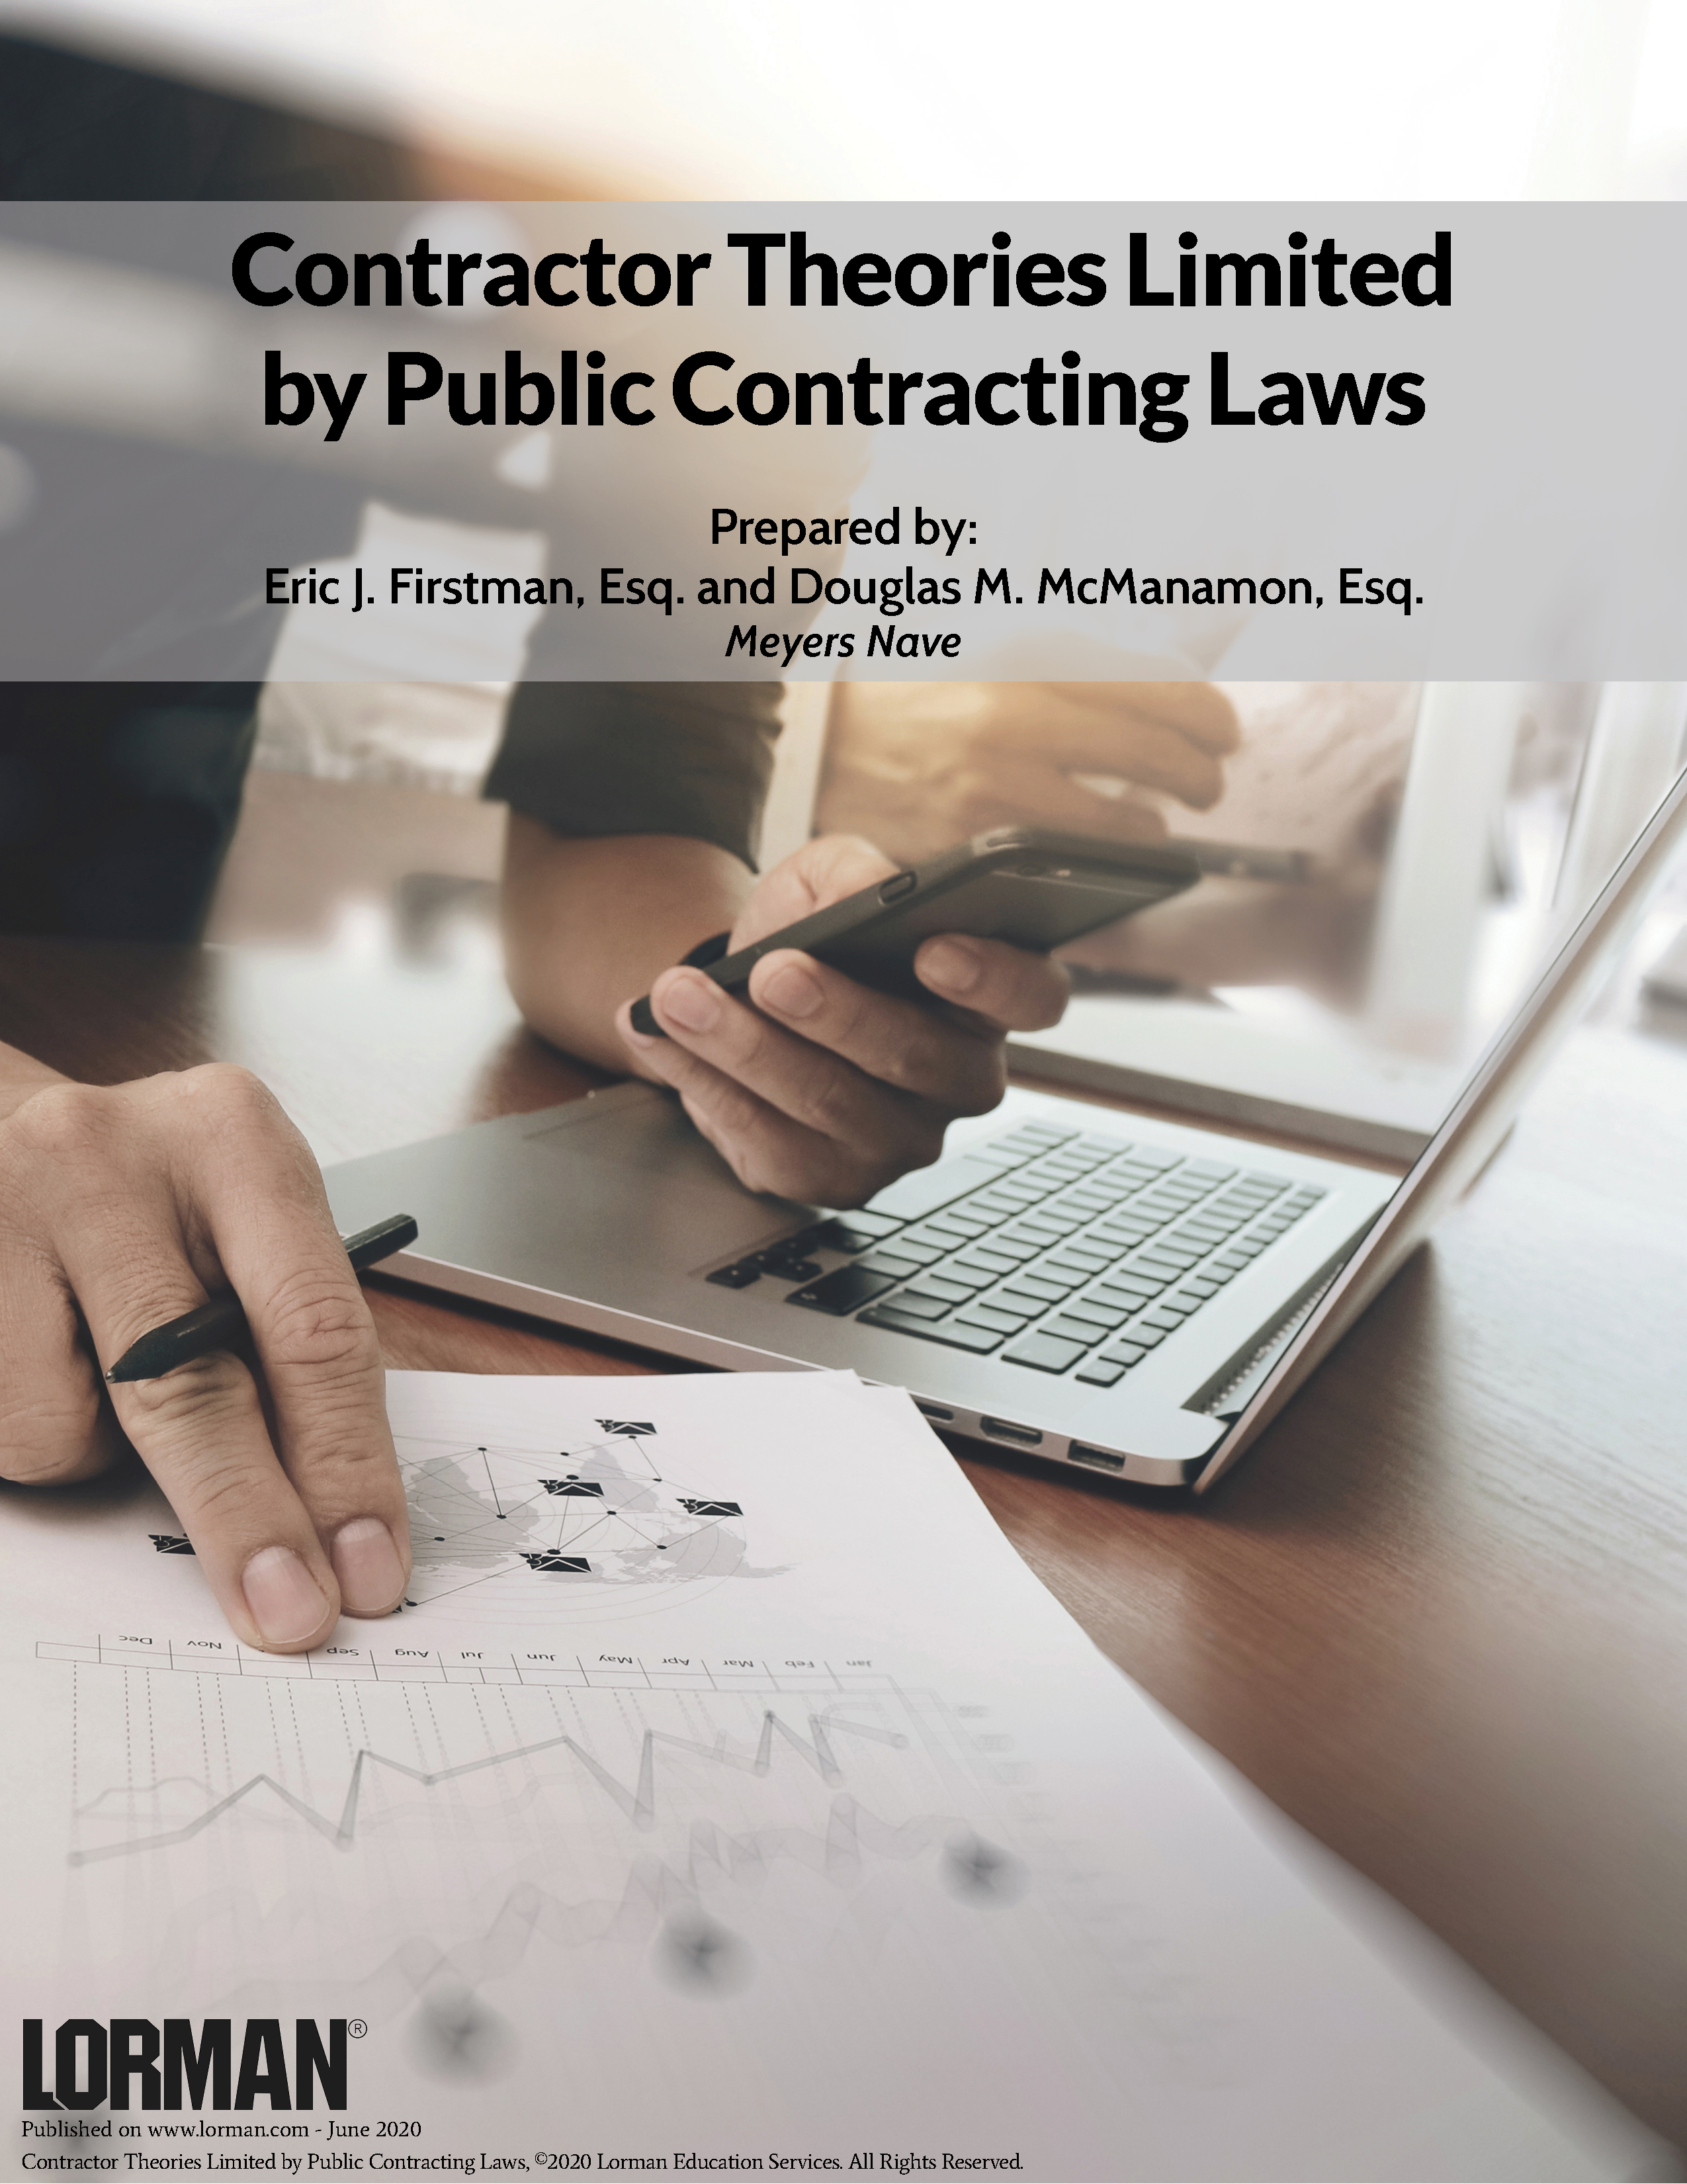 Contractor Theories Limited by Public Contracting Laws